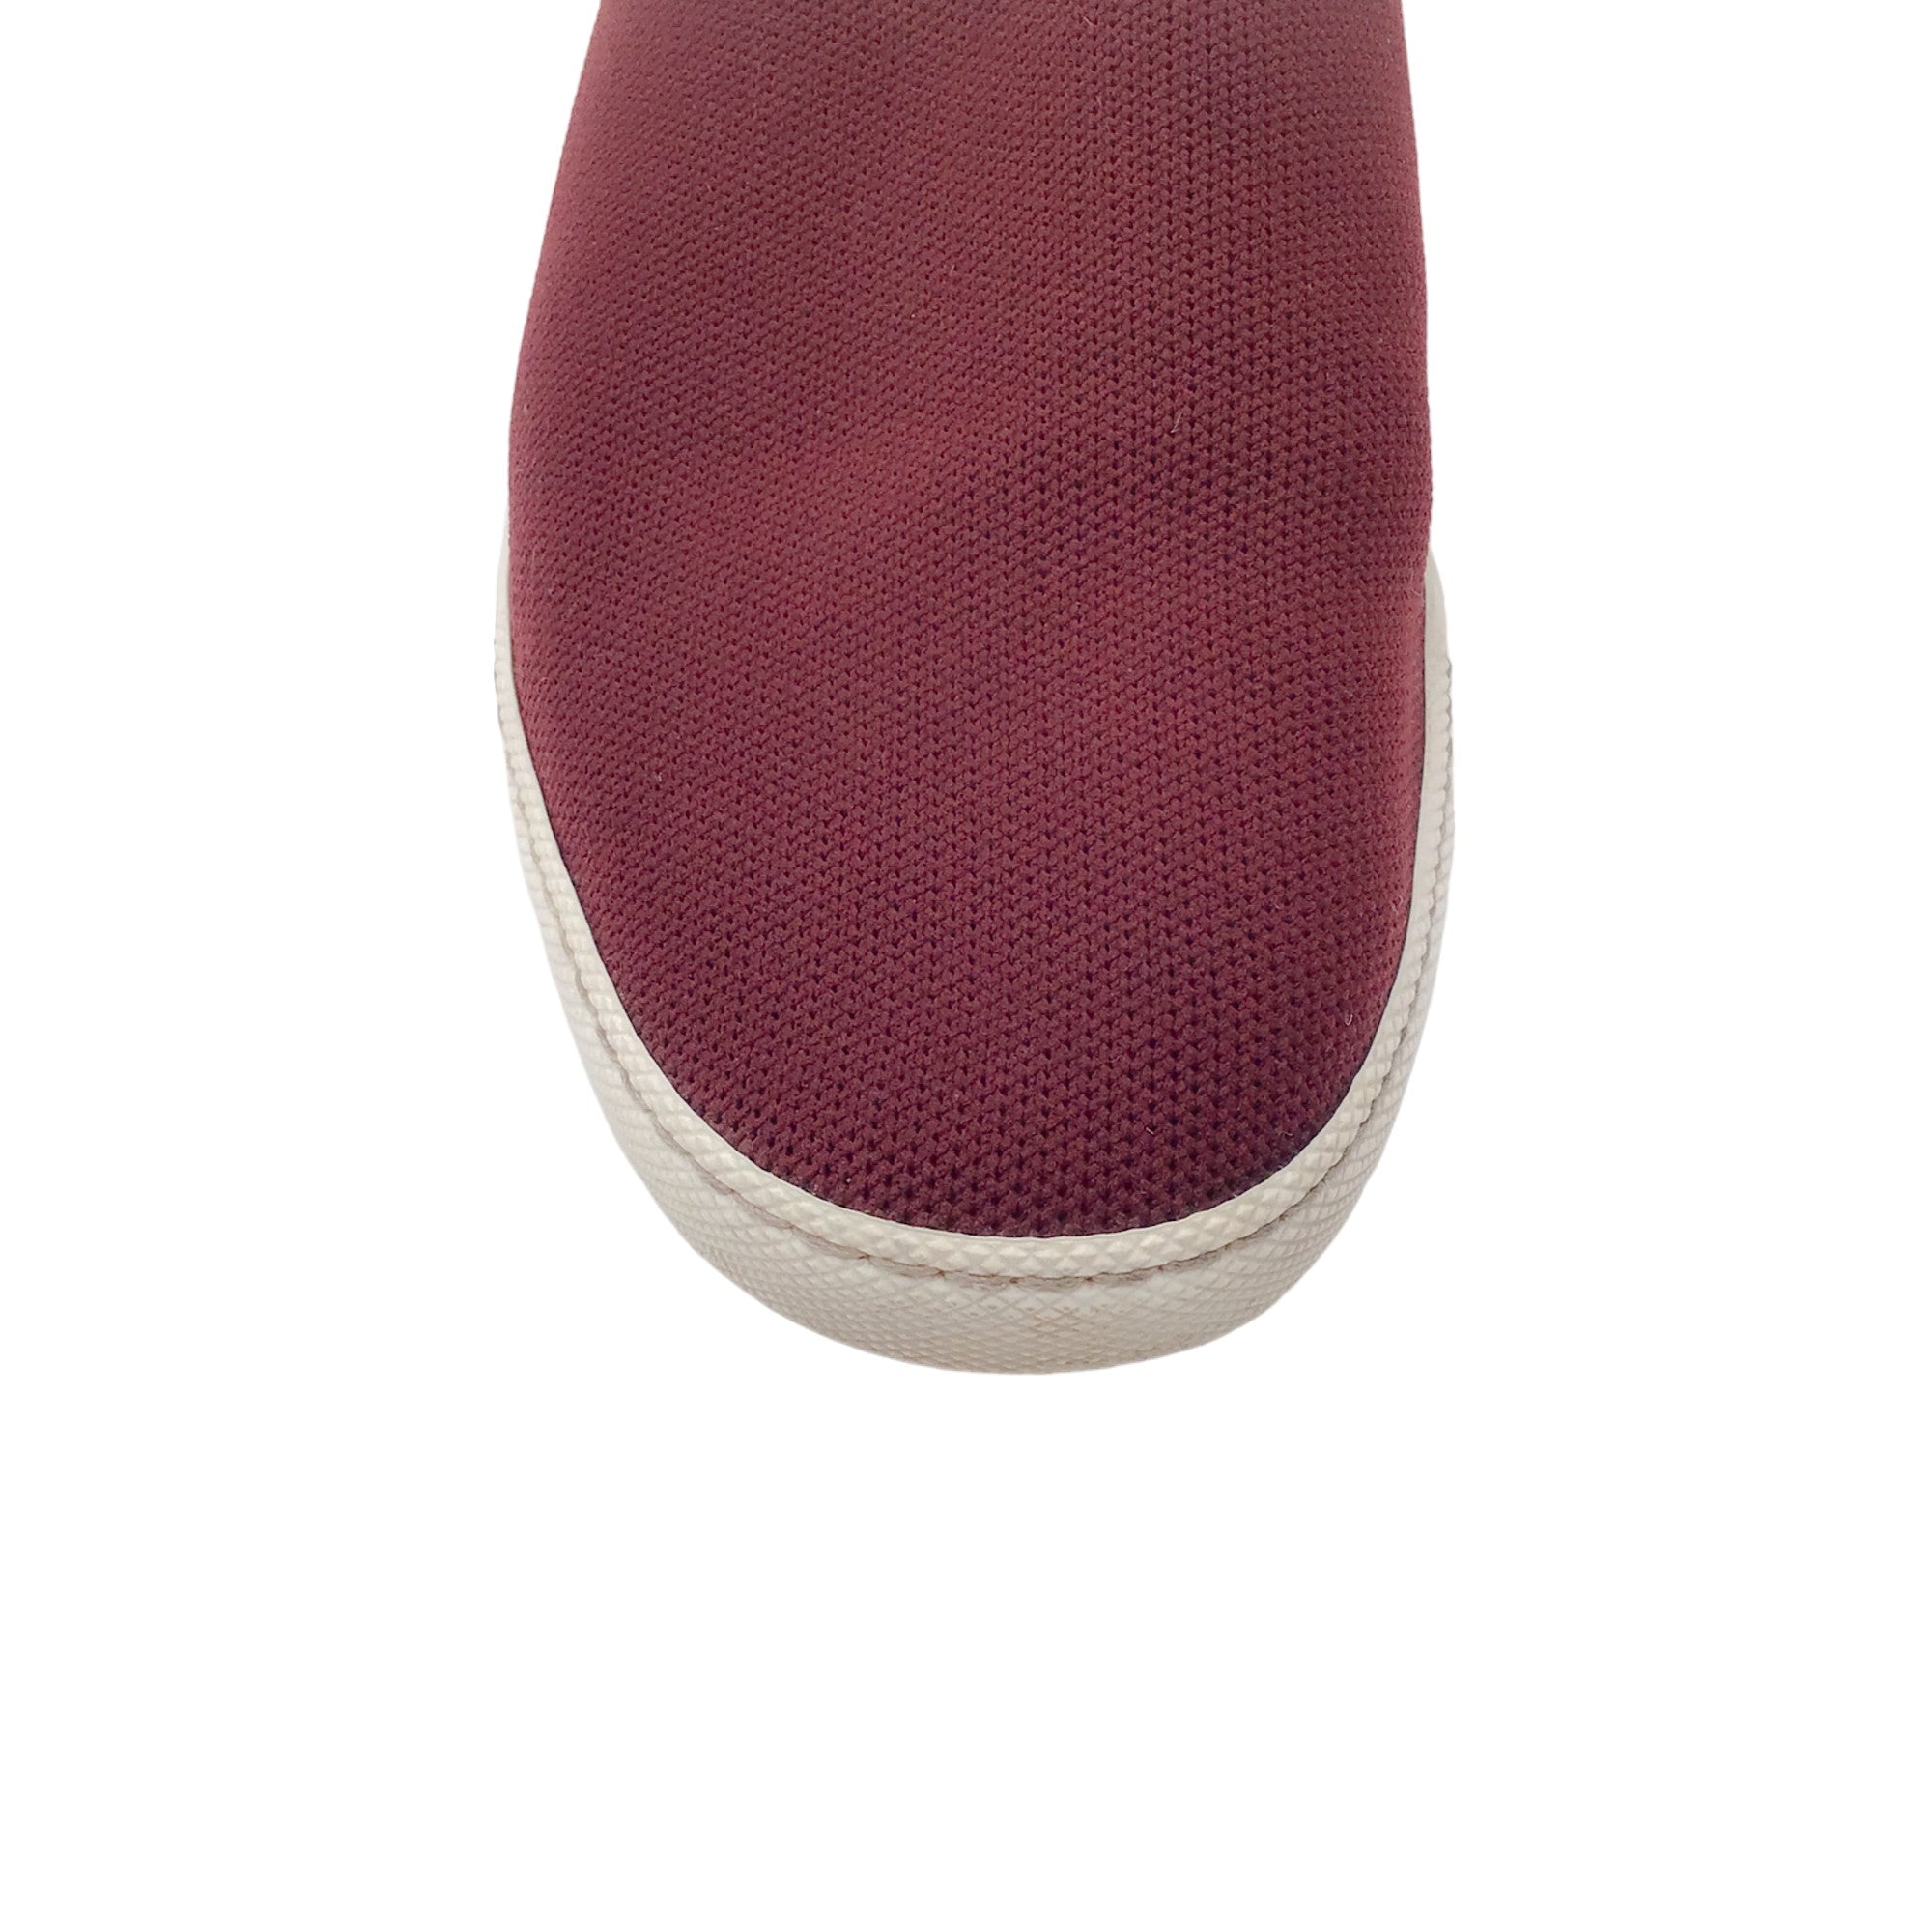 Hermes Burgundy / Red Leather Trimmed Knit Sneakers